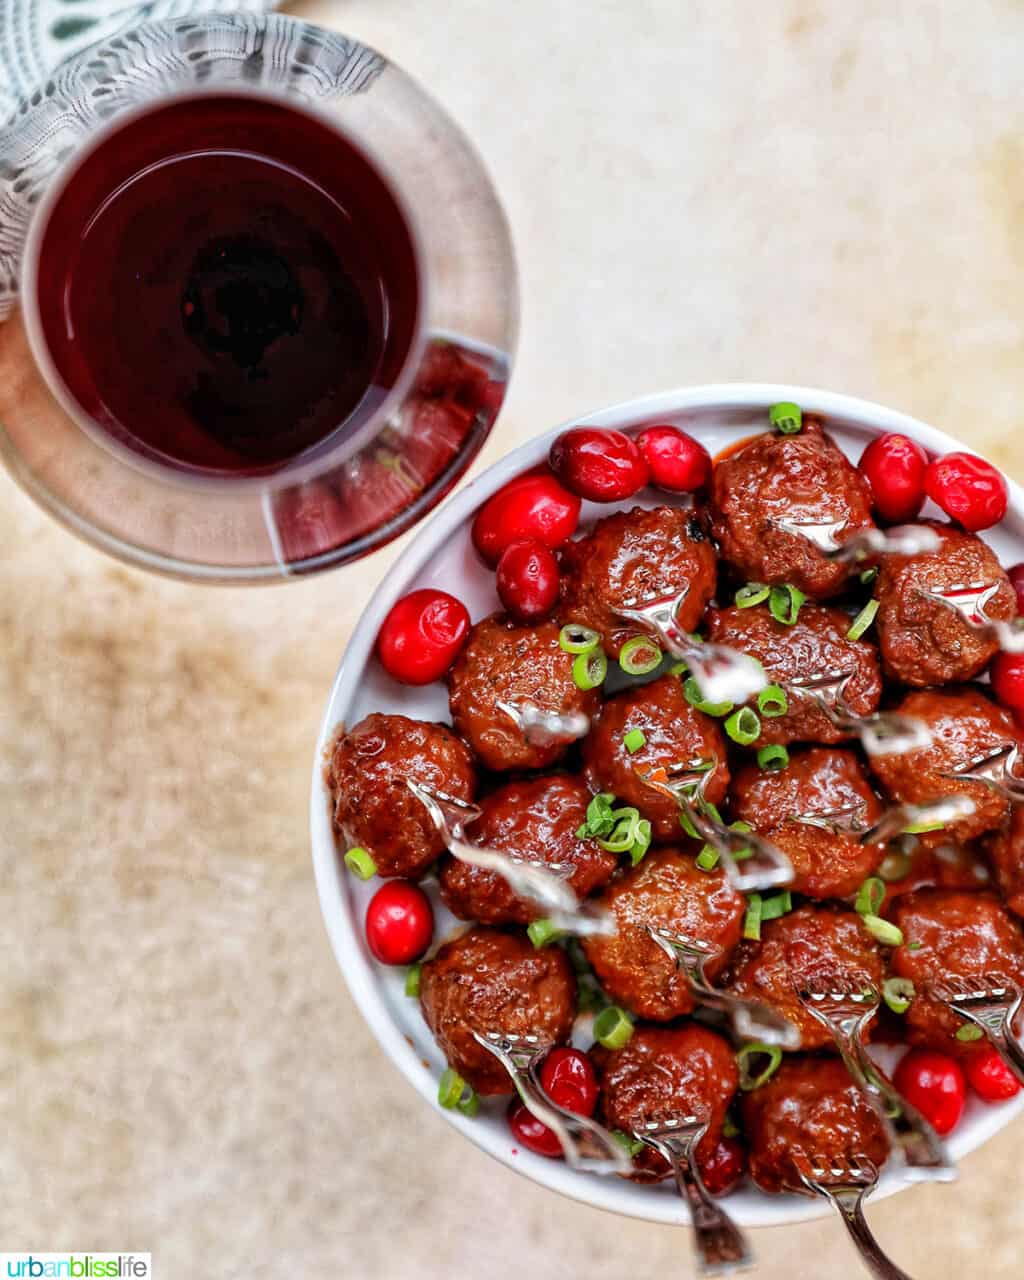 red wine glass next to plate of cranberry meatballs